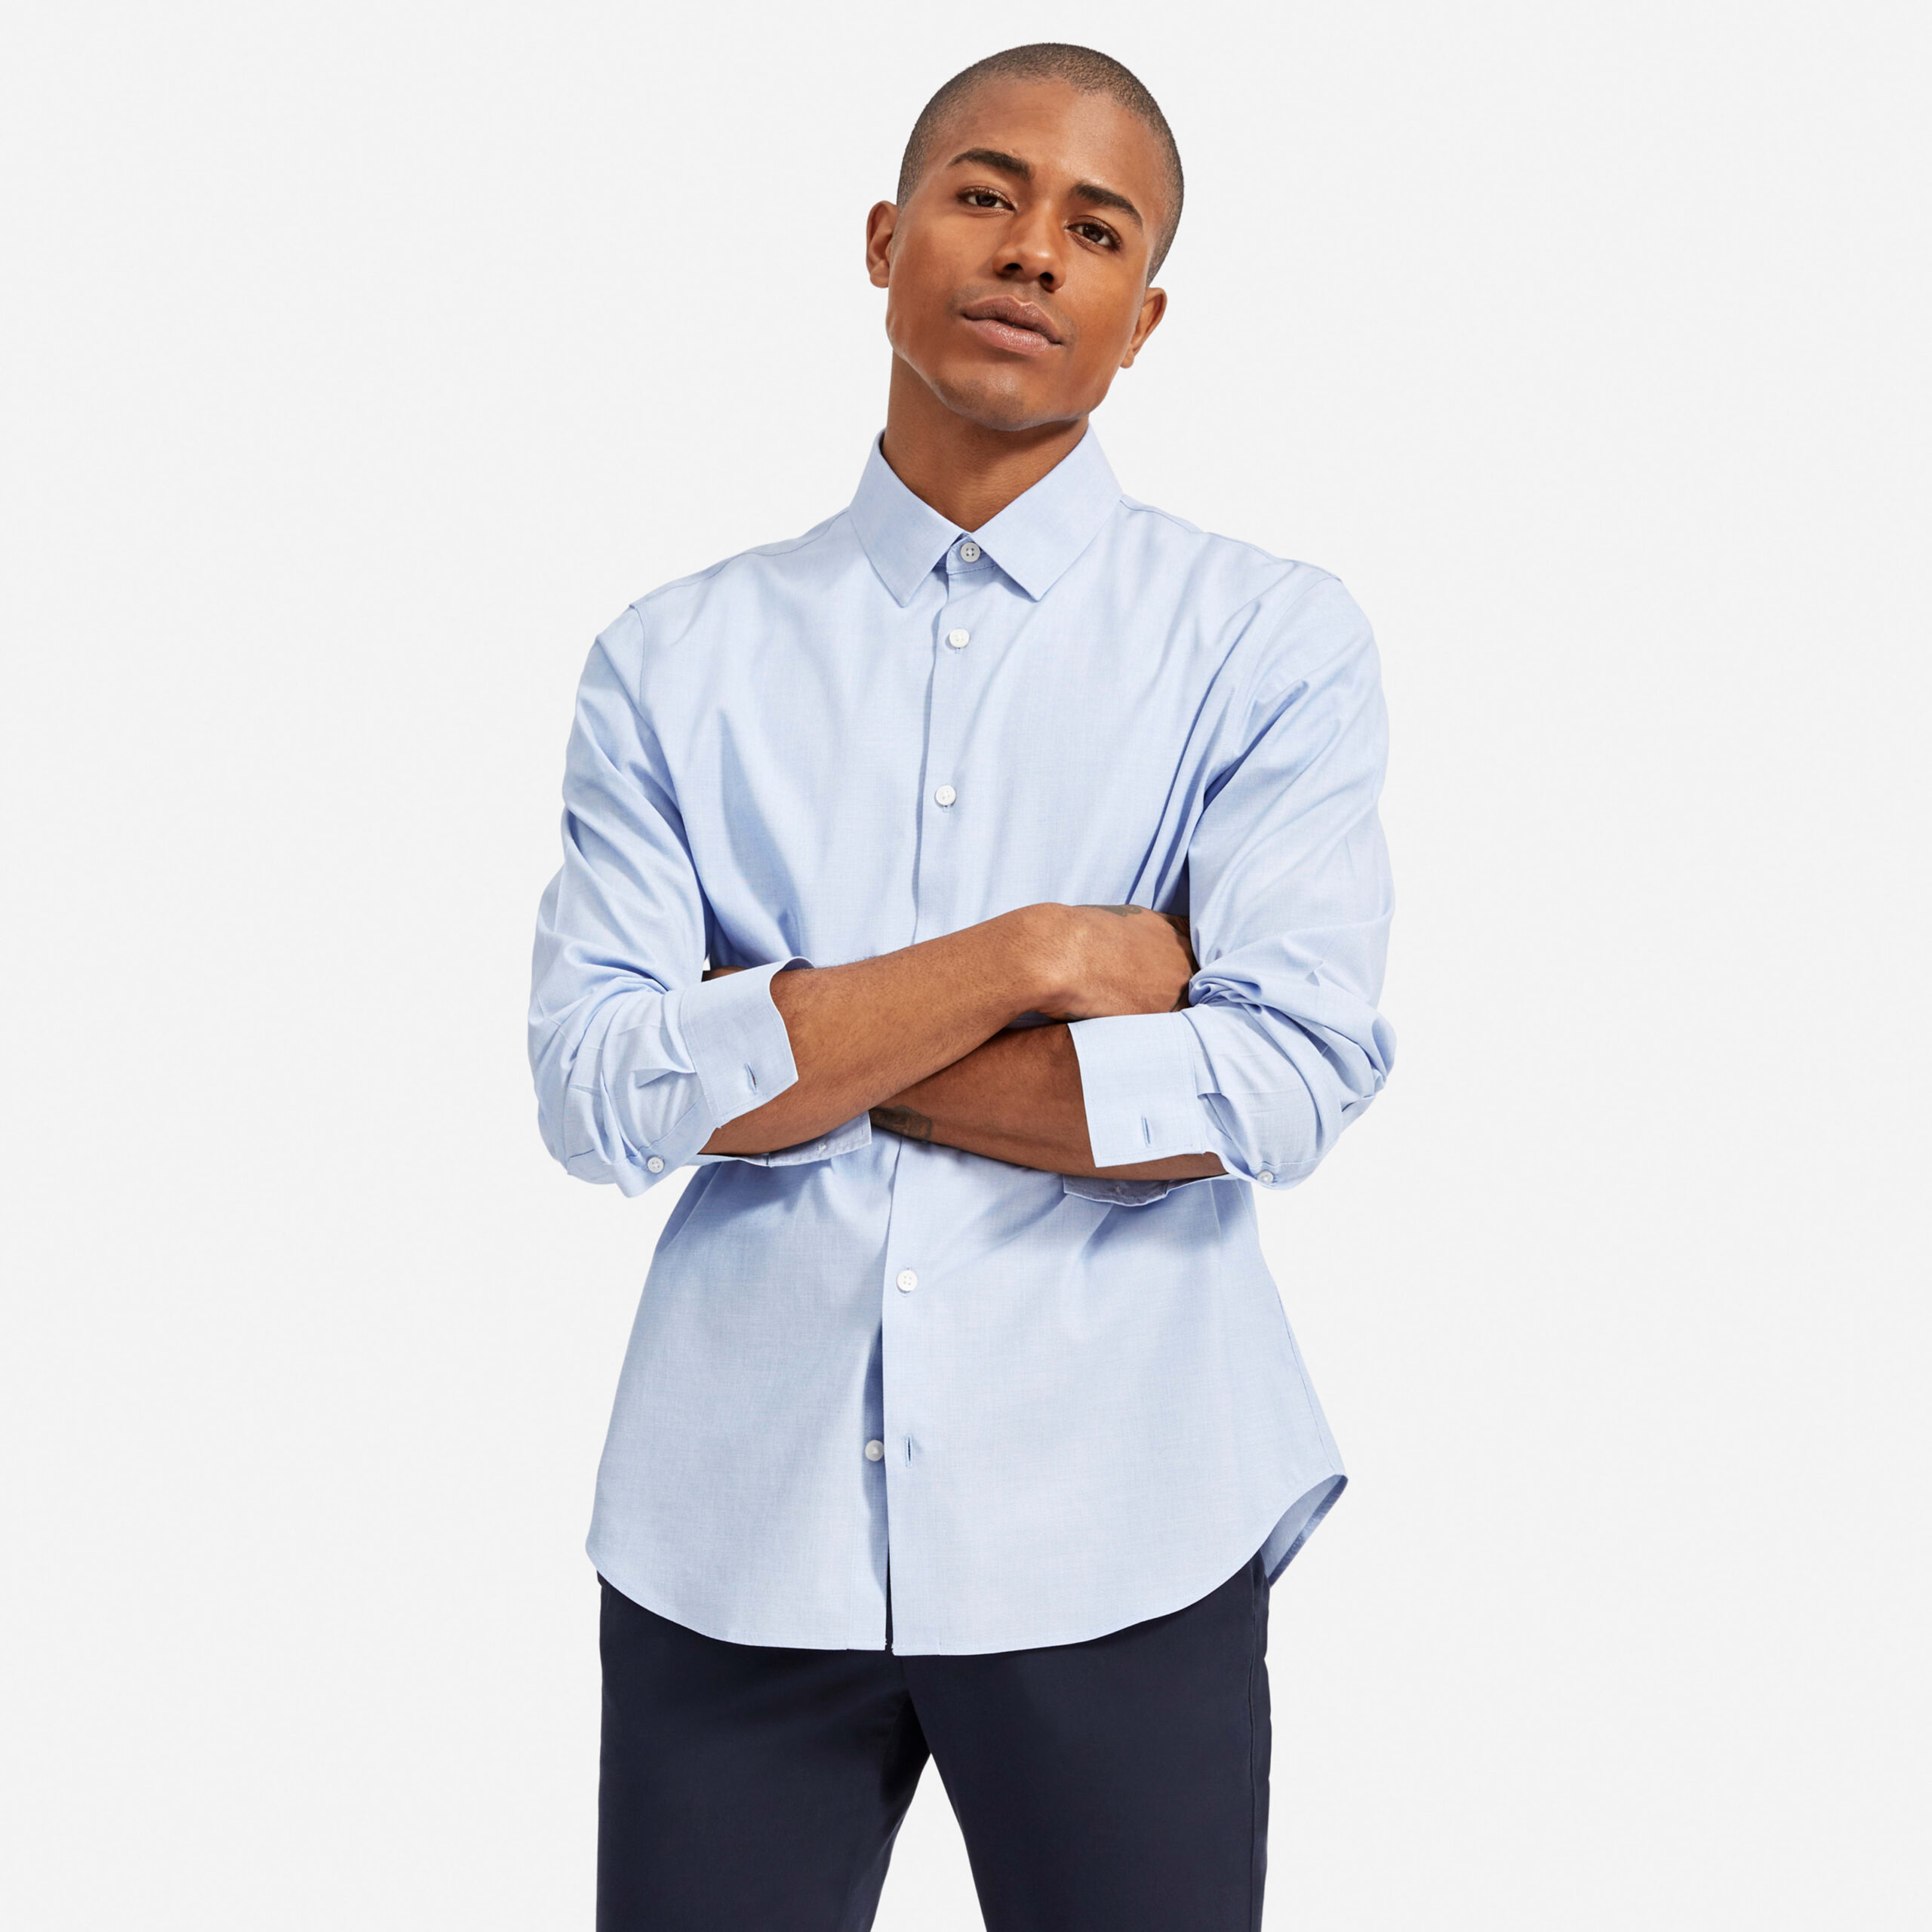 Men's Standard Fit Performance Shirt by Everlane in Pale Blue